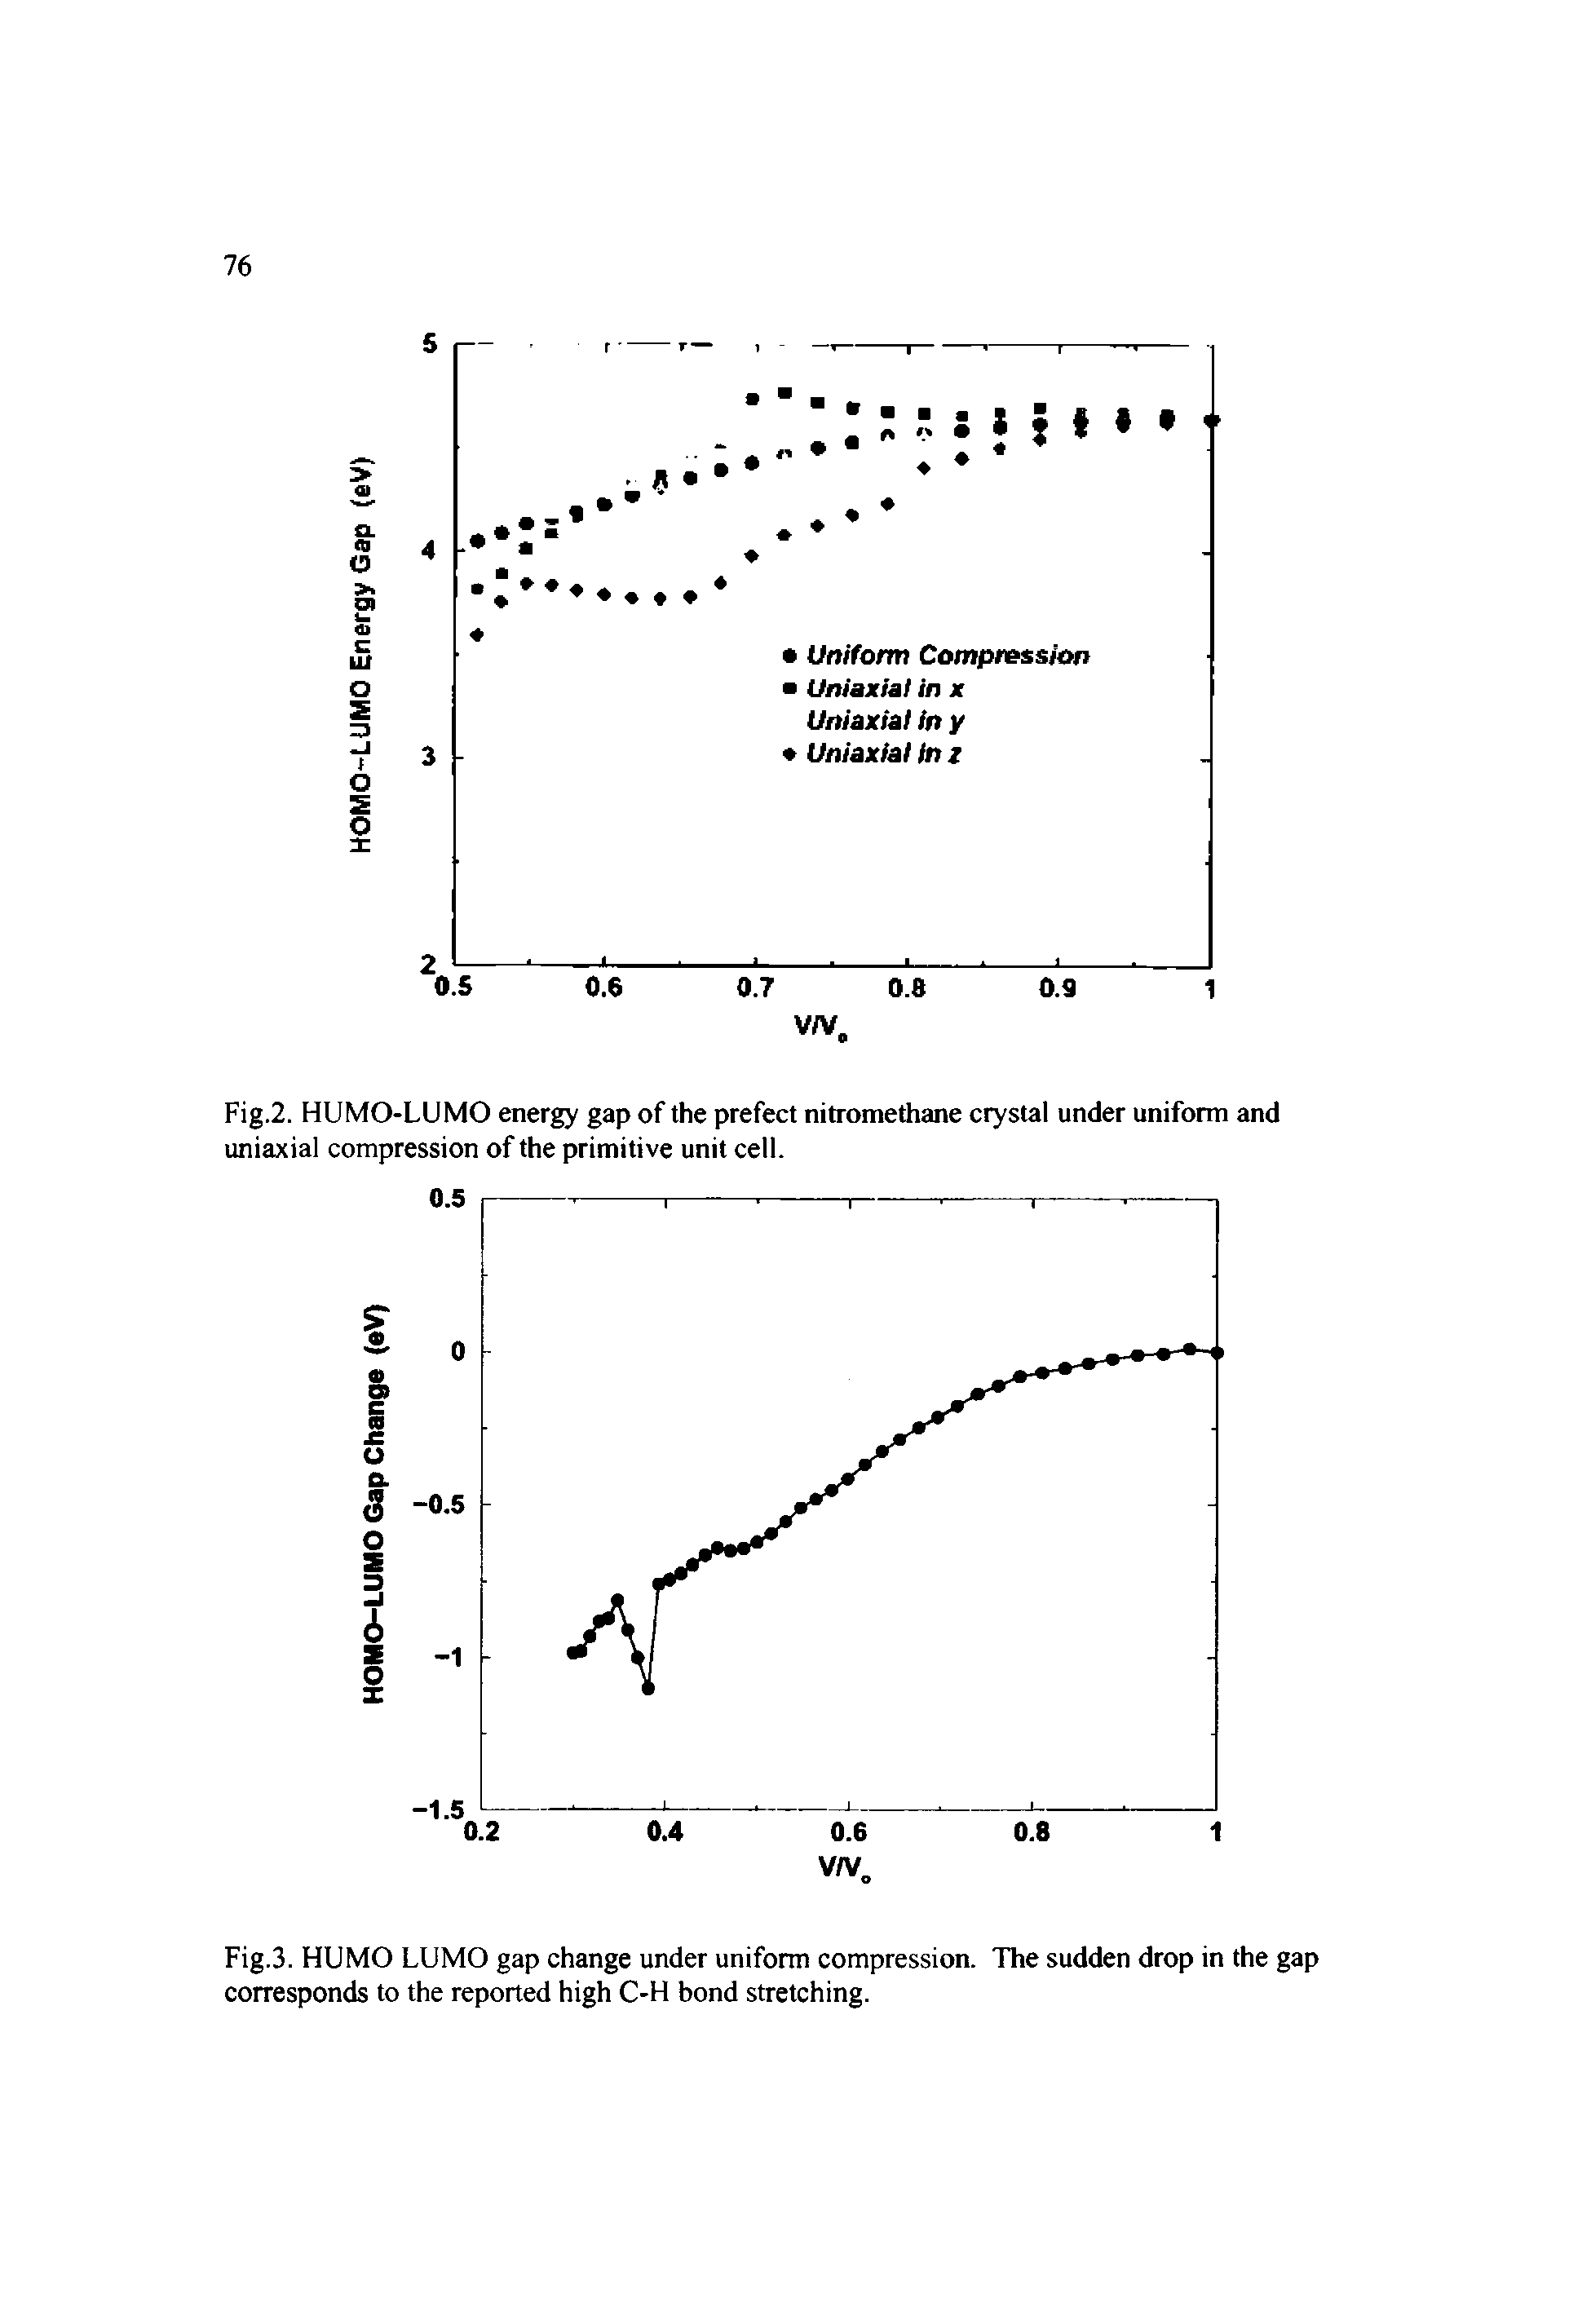 Fig.3. HUMO LUMO gap change under uniform compression. The sudden drop in the gap corresponds to the reported high C-H bond stretching.